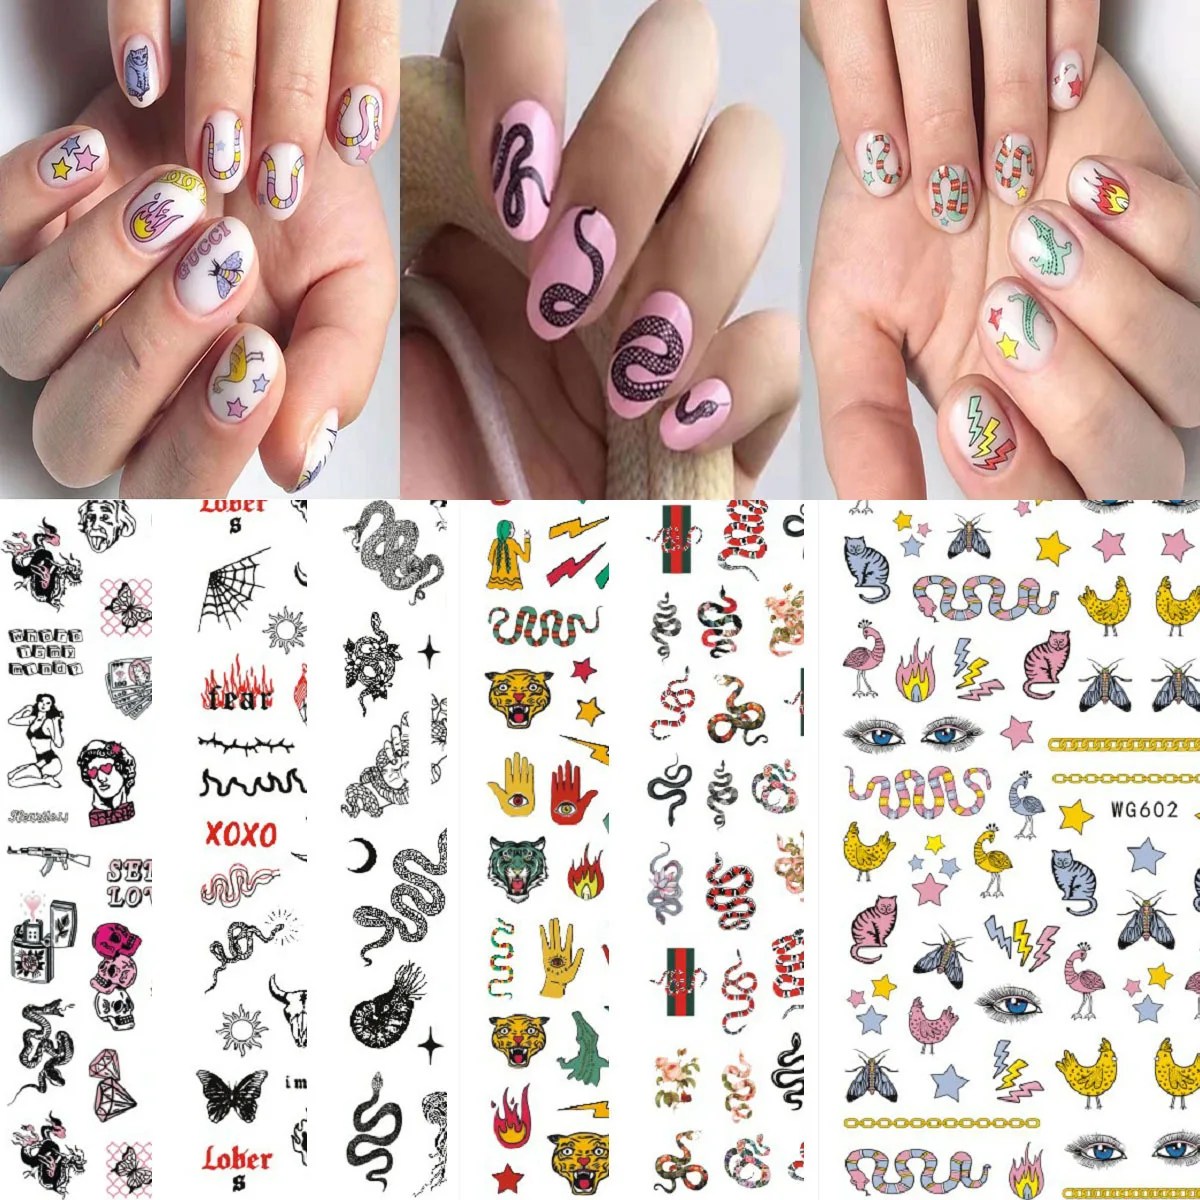 6 Sheets Snake Nail Art Stickers, 3d Pattern Sticker Decals For Women ...